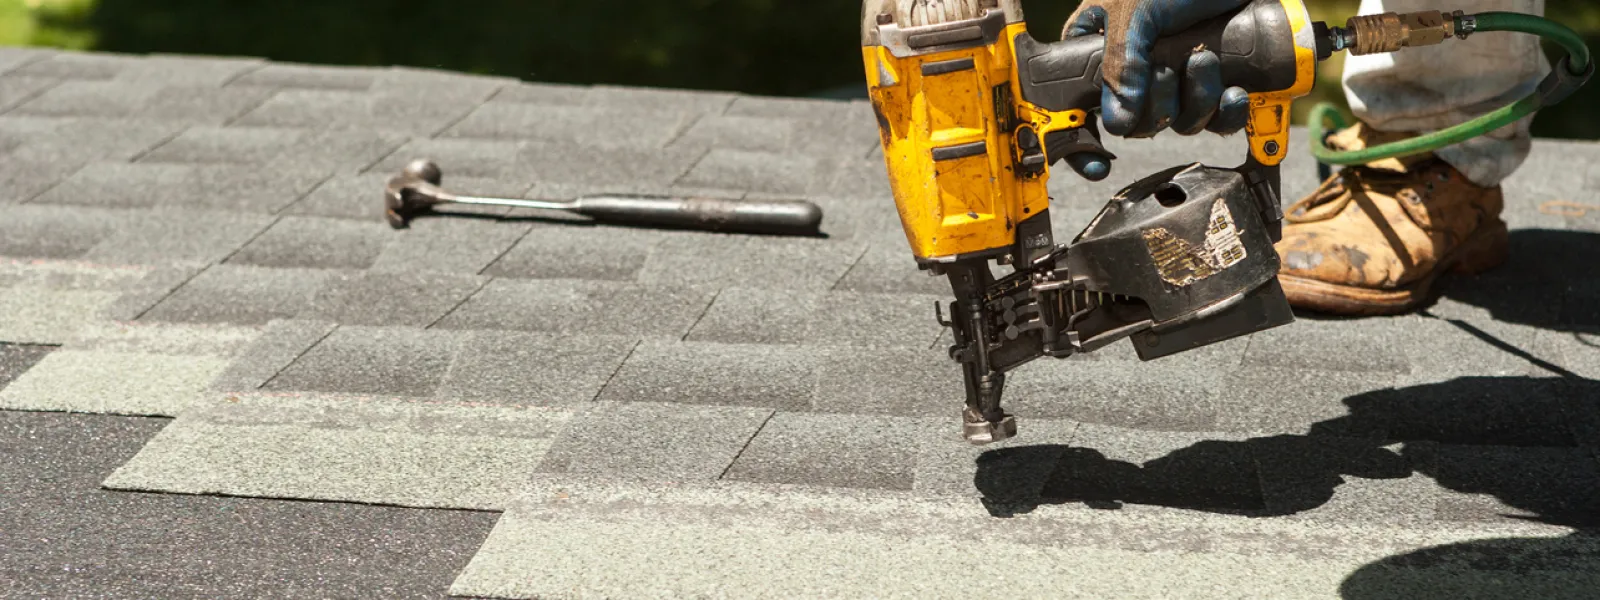 replacing shingles on a roof